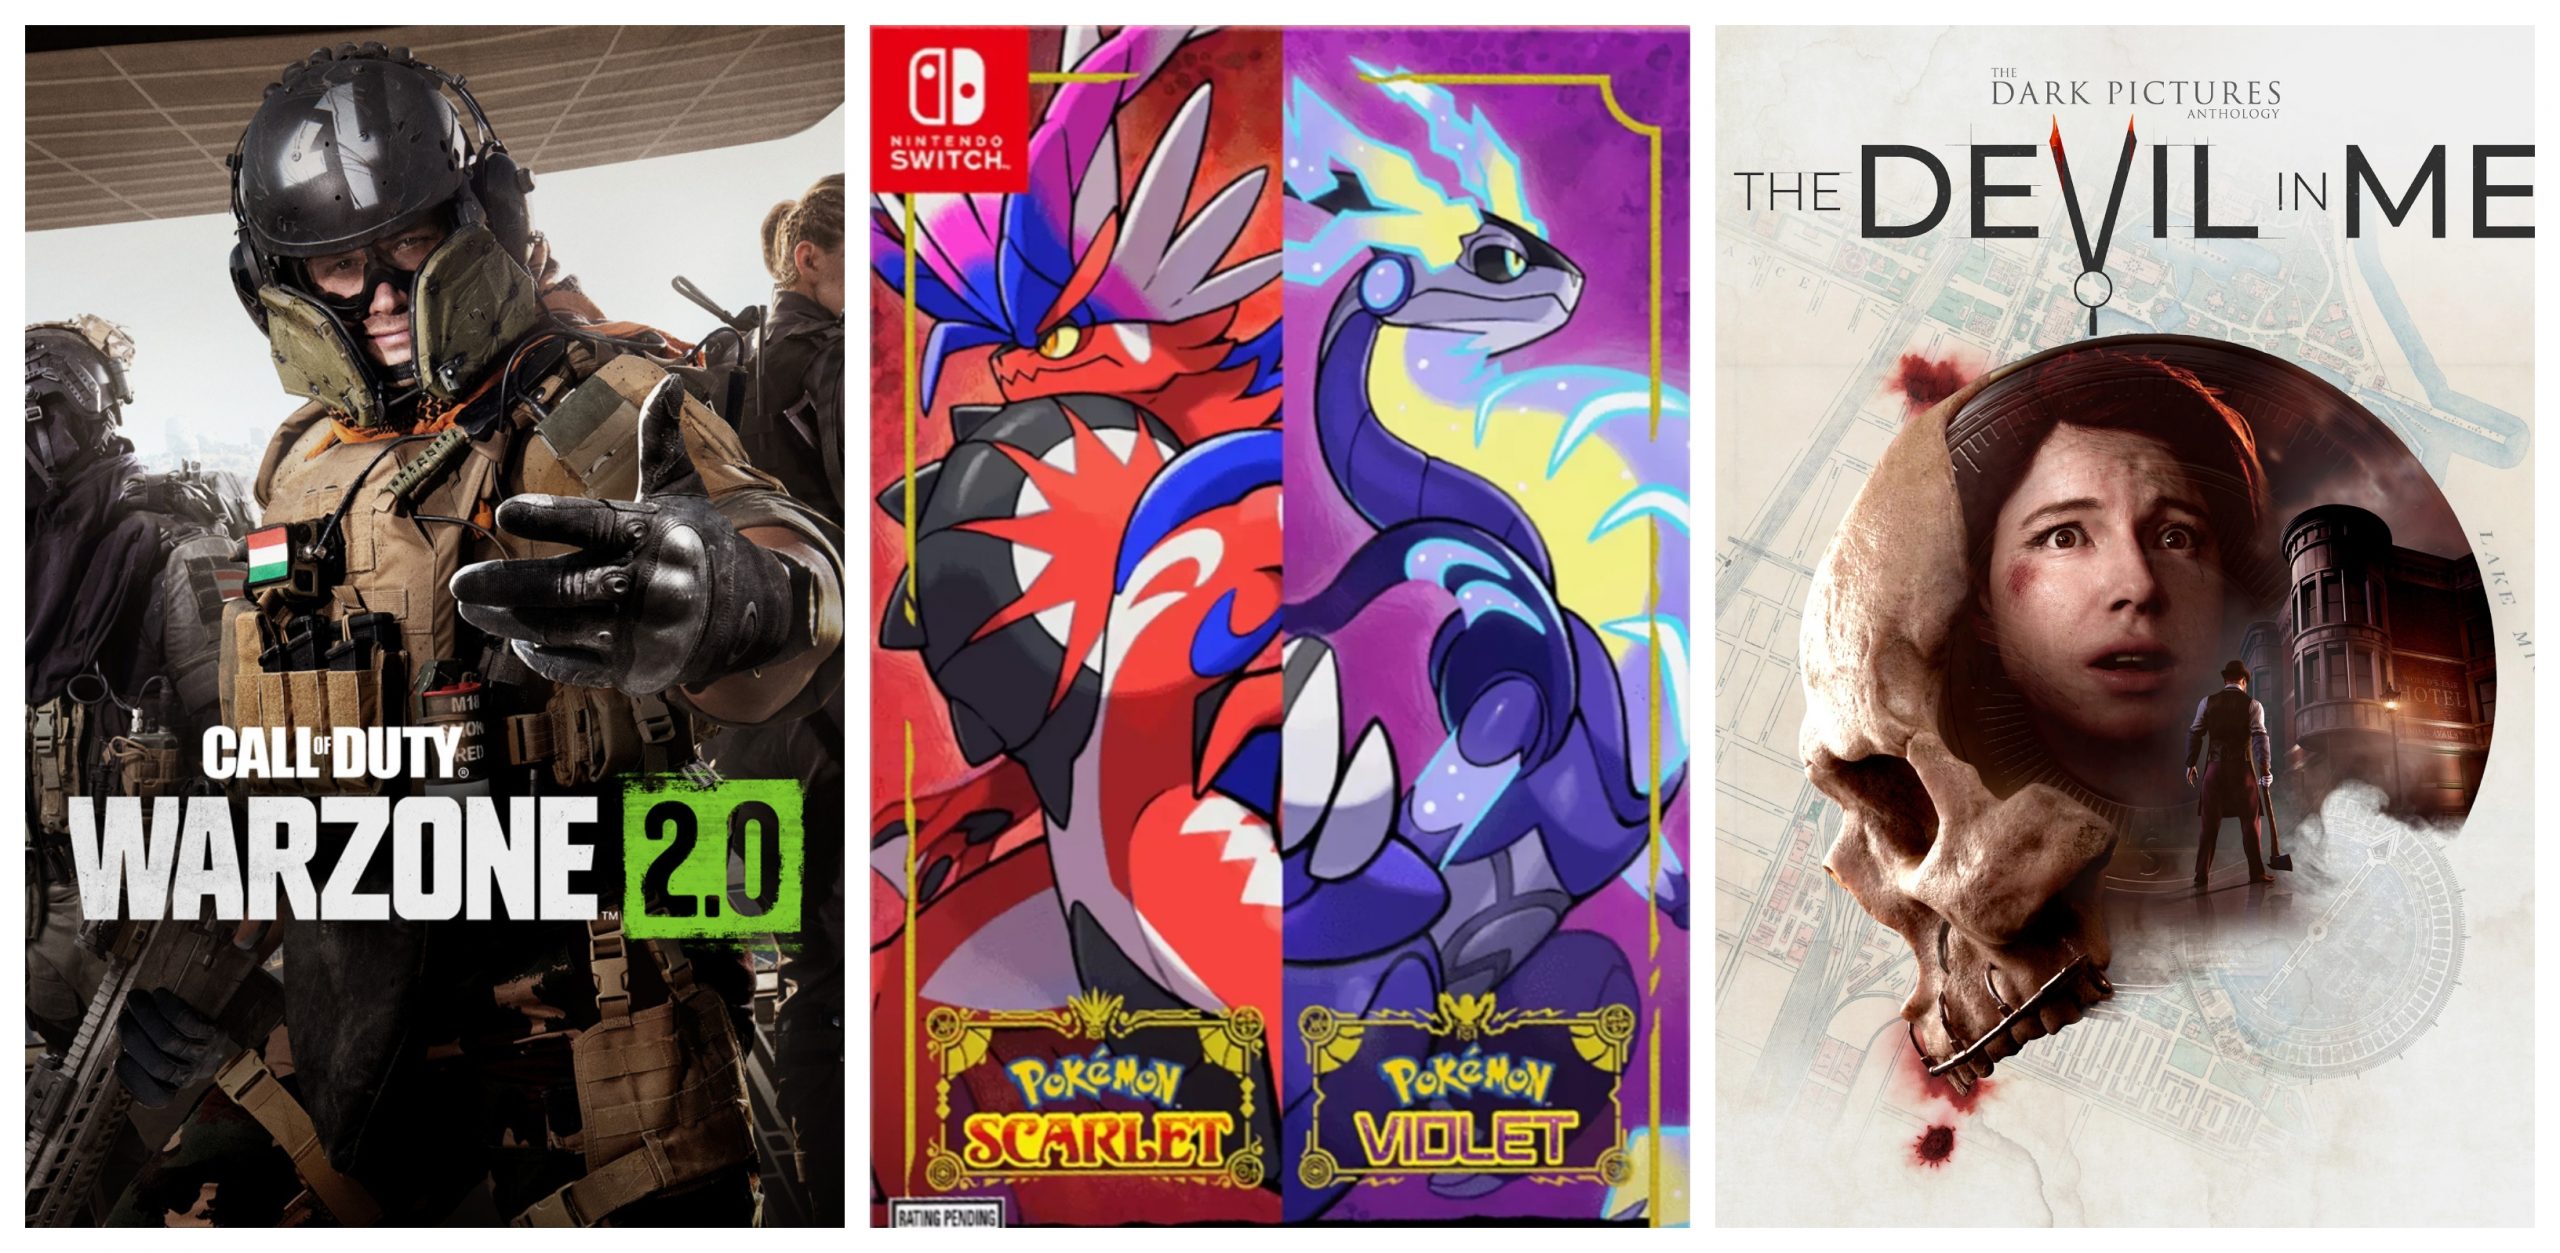 The biggest new video games releasing the week of 11/14/22